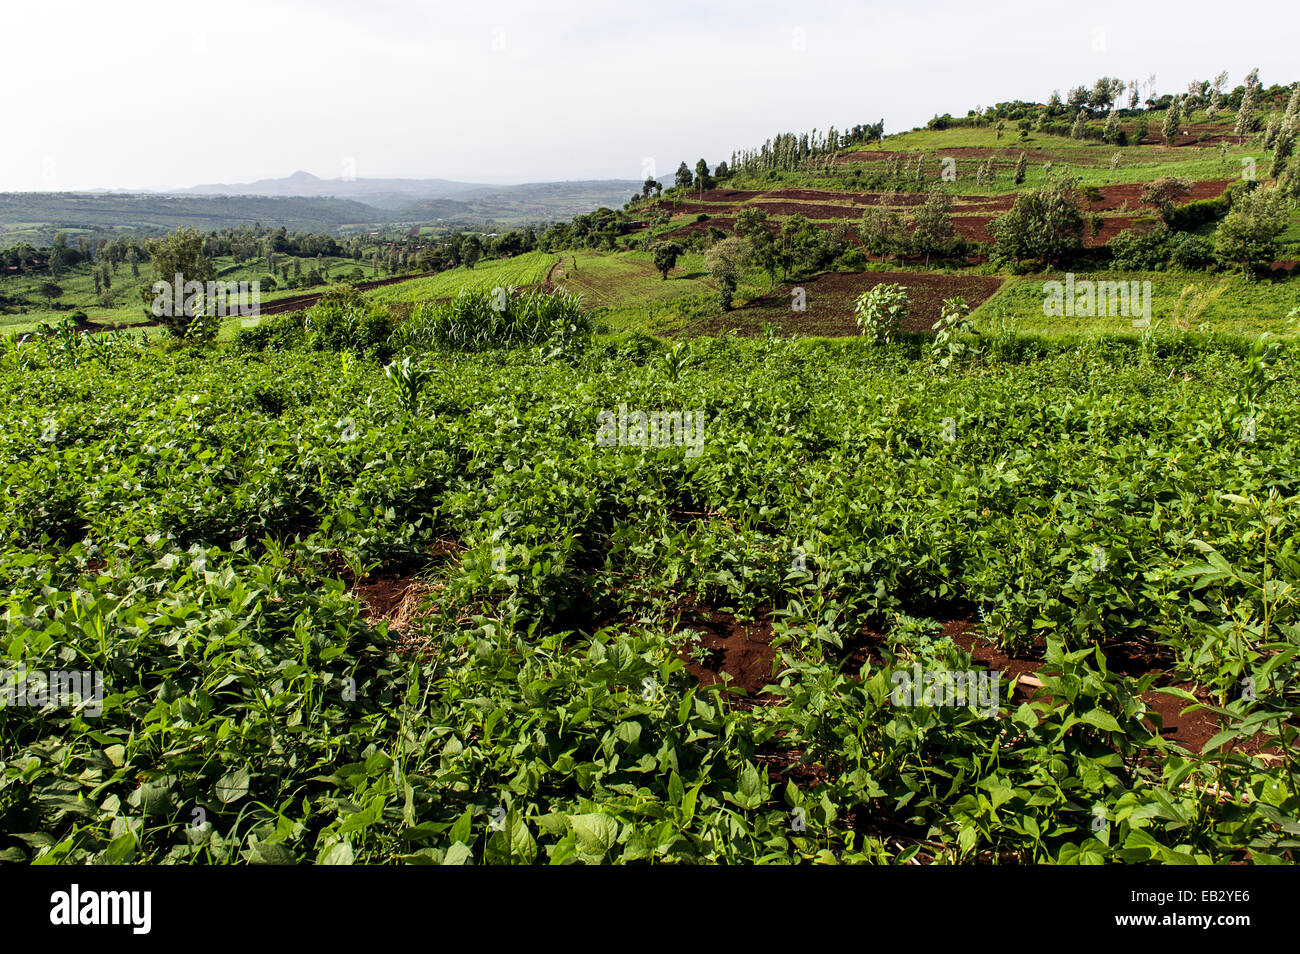 Lush, green farm crops growing in rows in rich volcanic soil on a hillside. Stock Photo